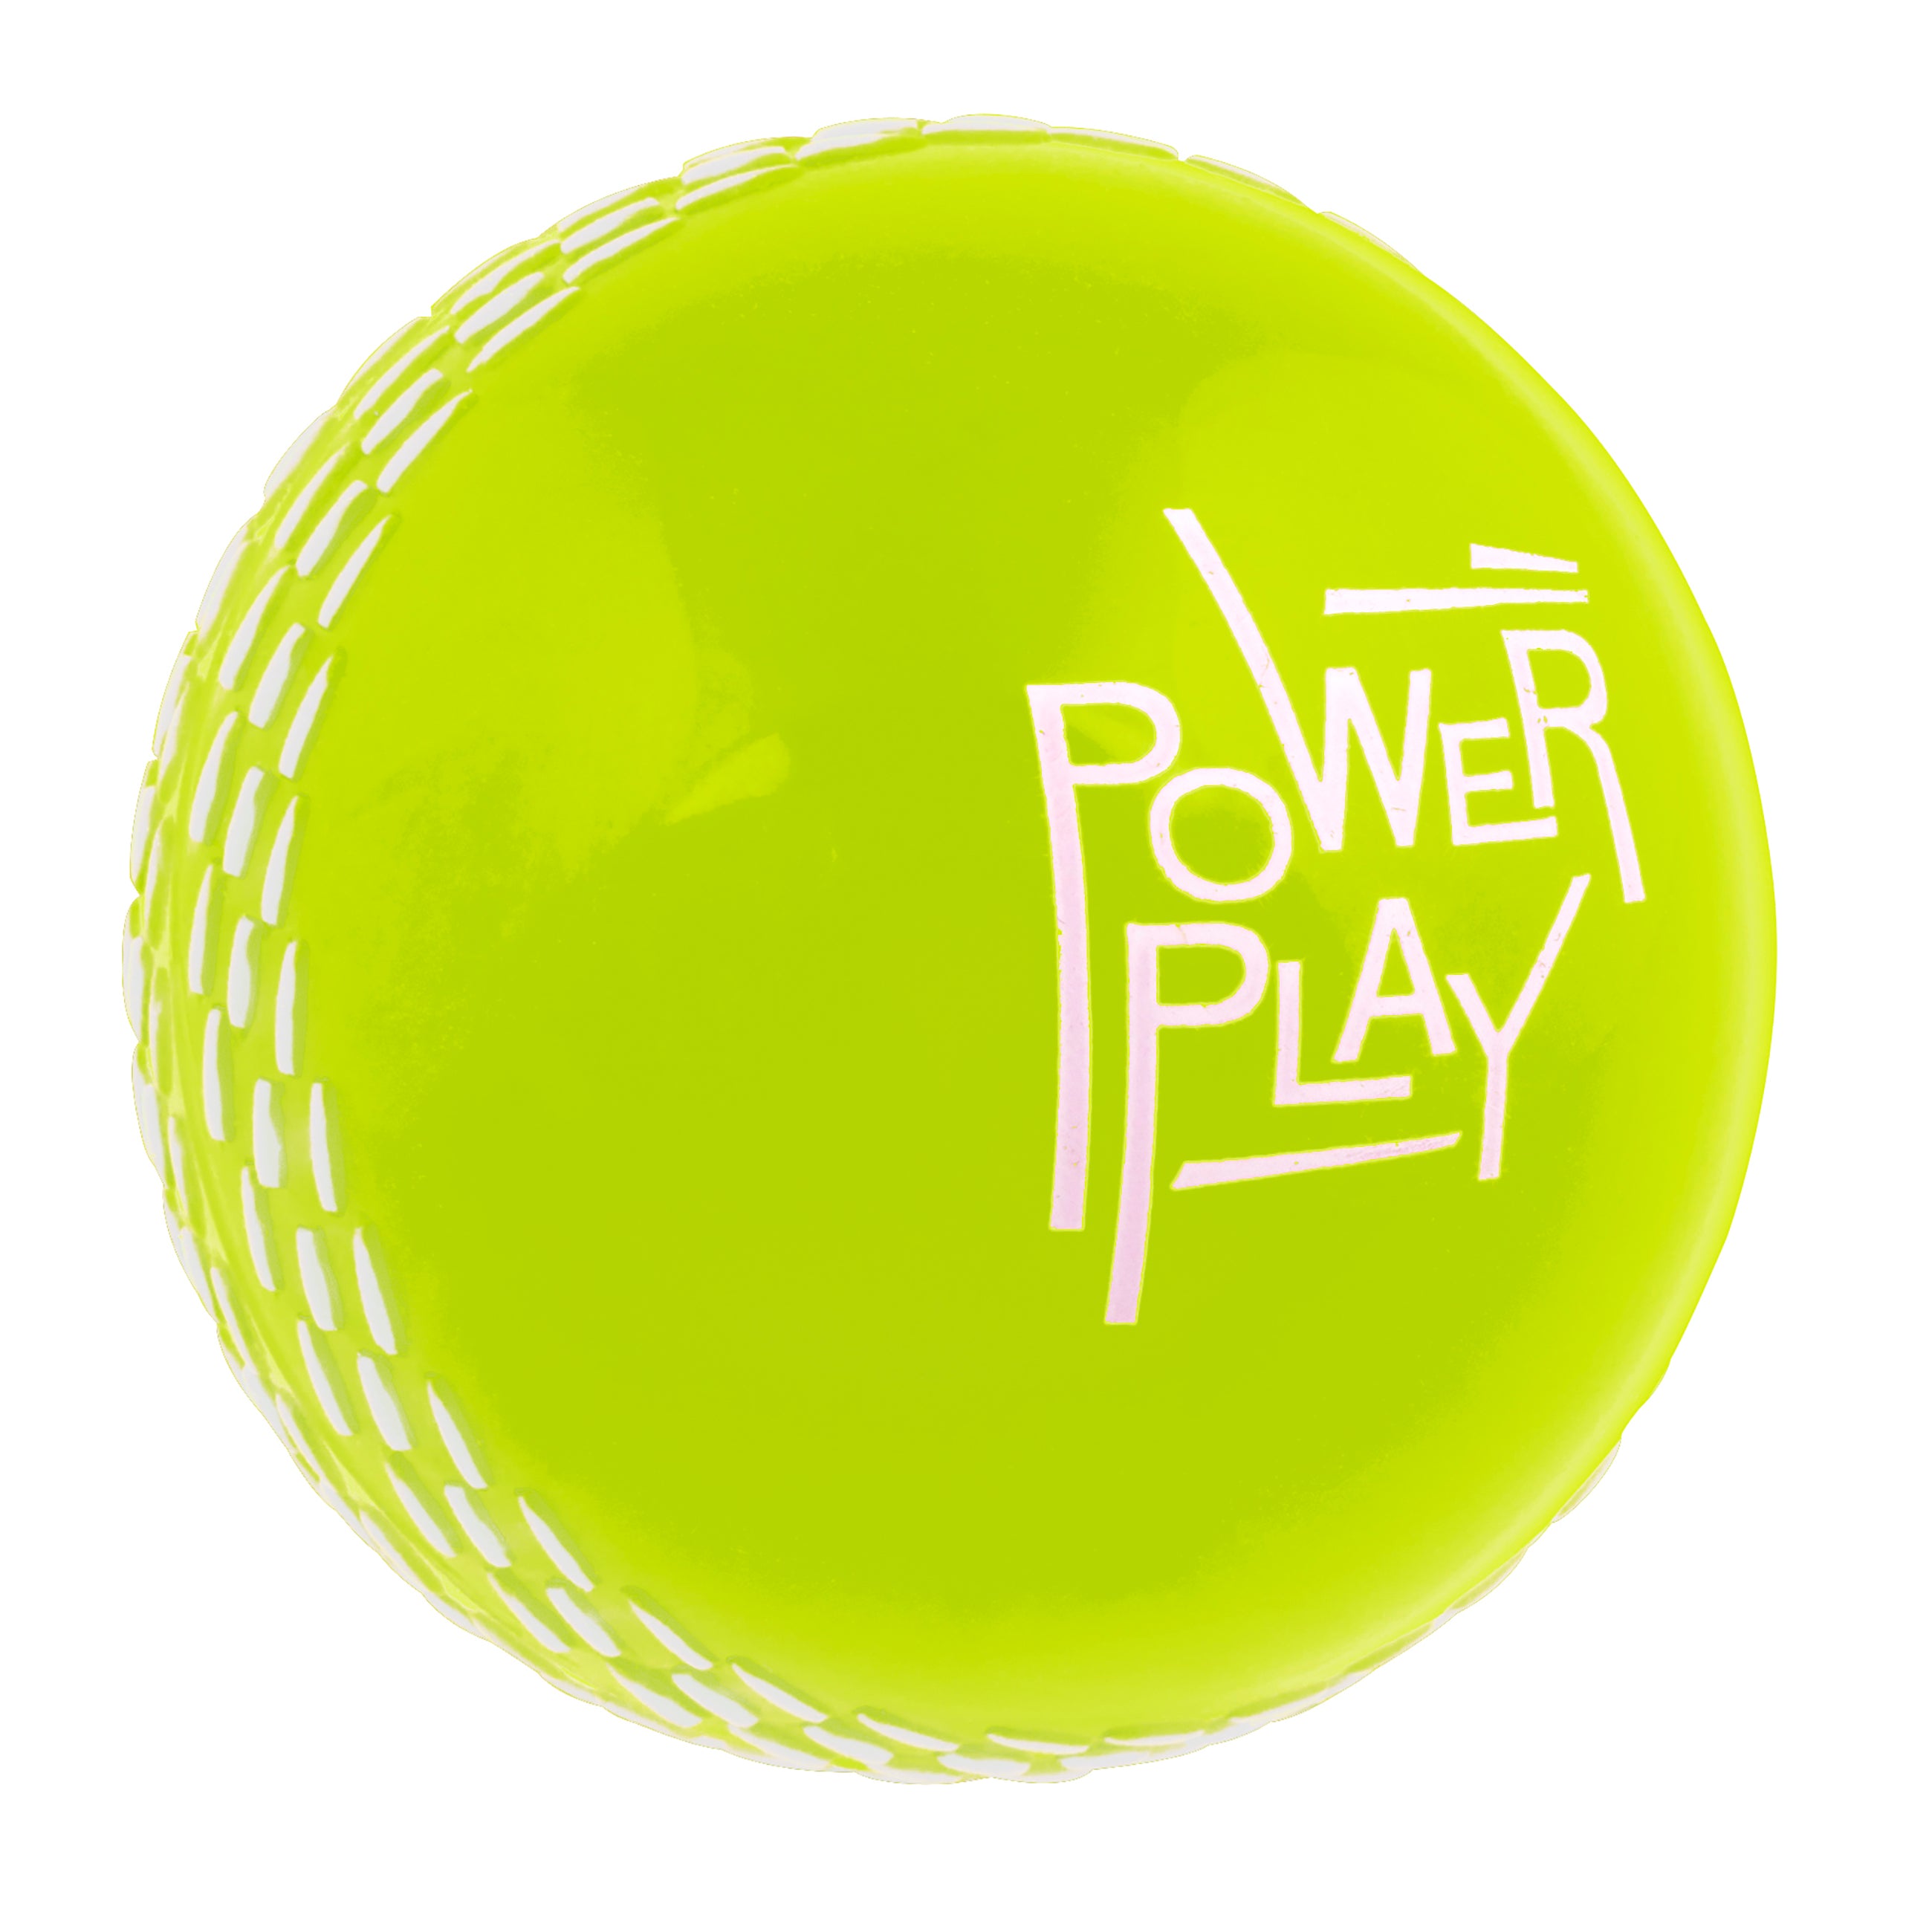 2600 CNBD20 5802557 Plastic Power Play Ball Yellow Front